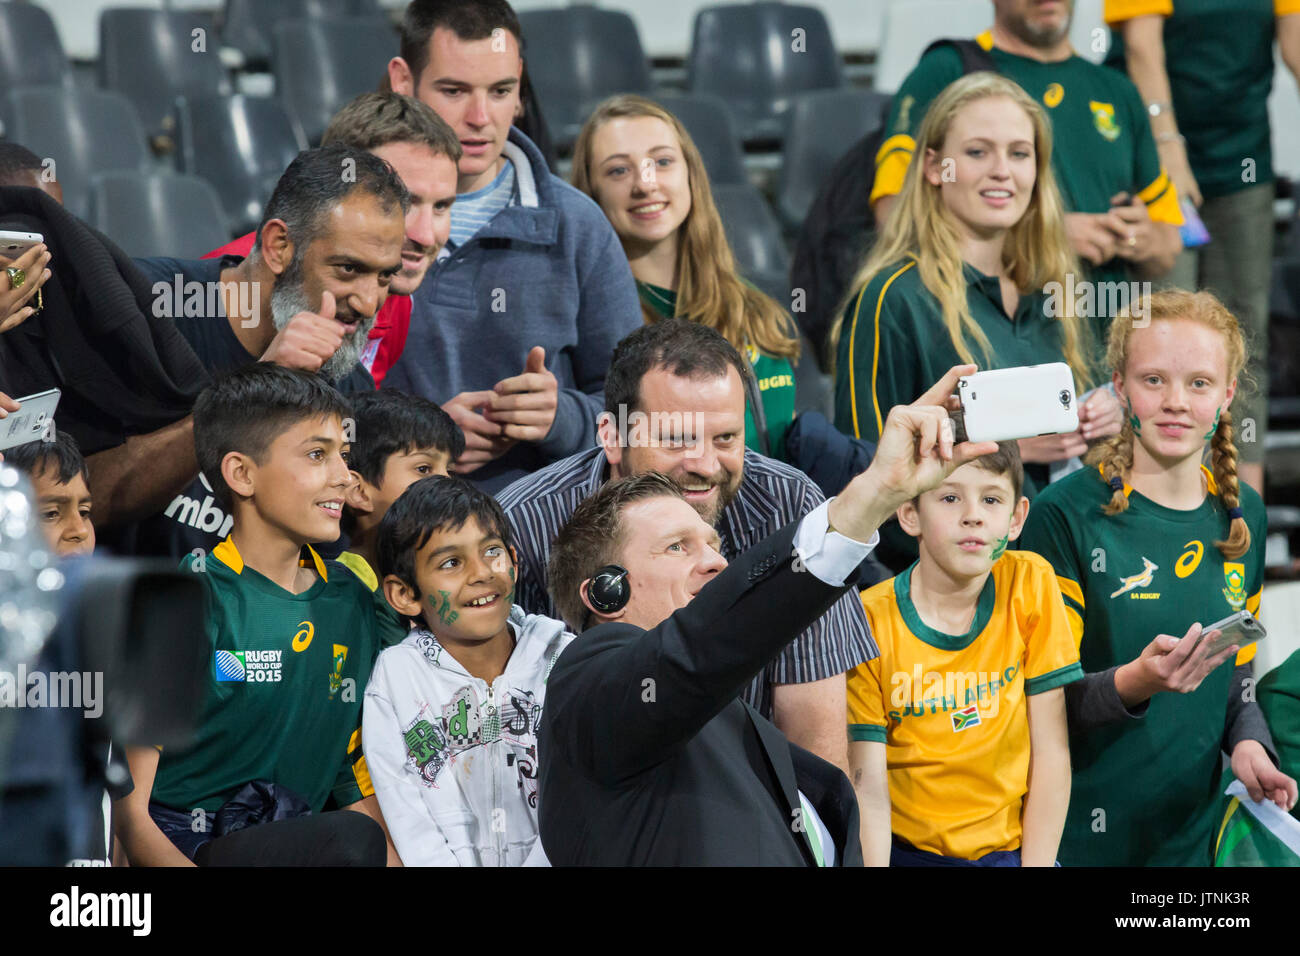 Jean de Villiers ex Springbok captain taking a selfie with fans after a rugby test Stock Photo